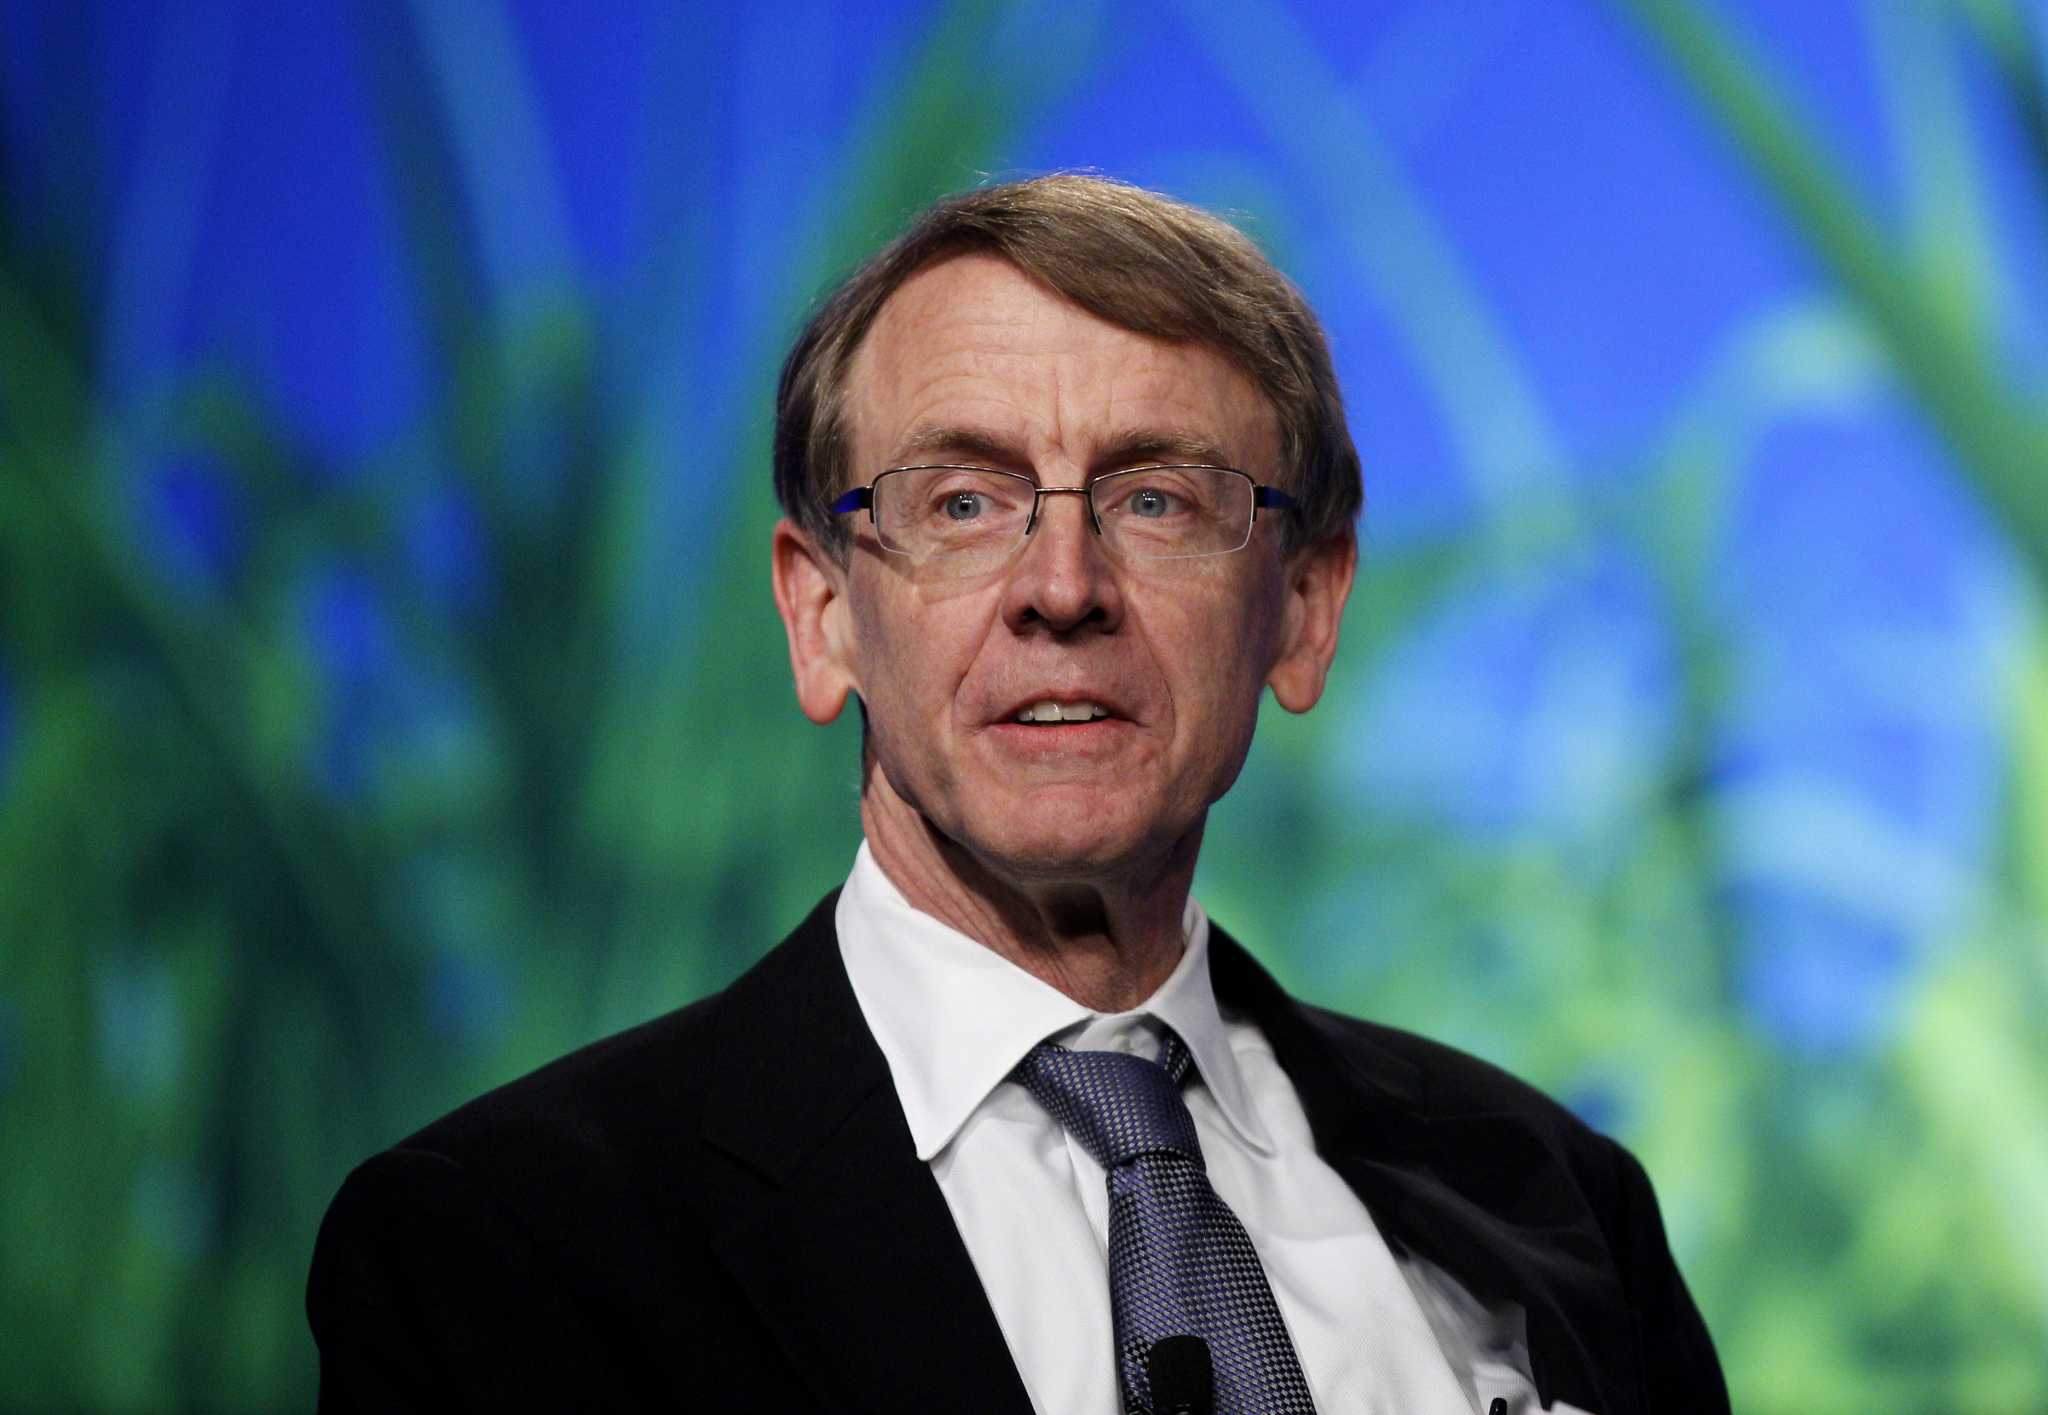 Stanford gets $1B for climate change school from John Doerr